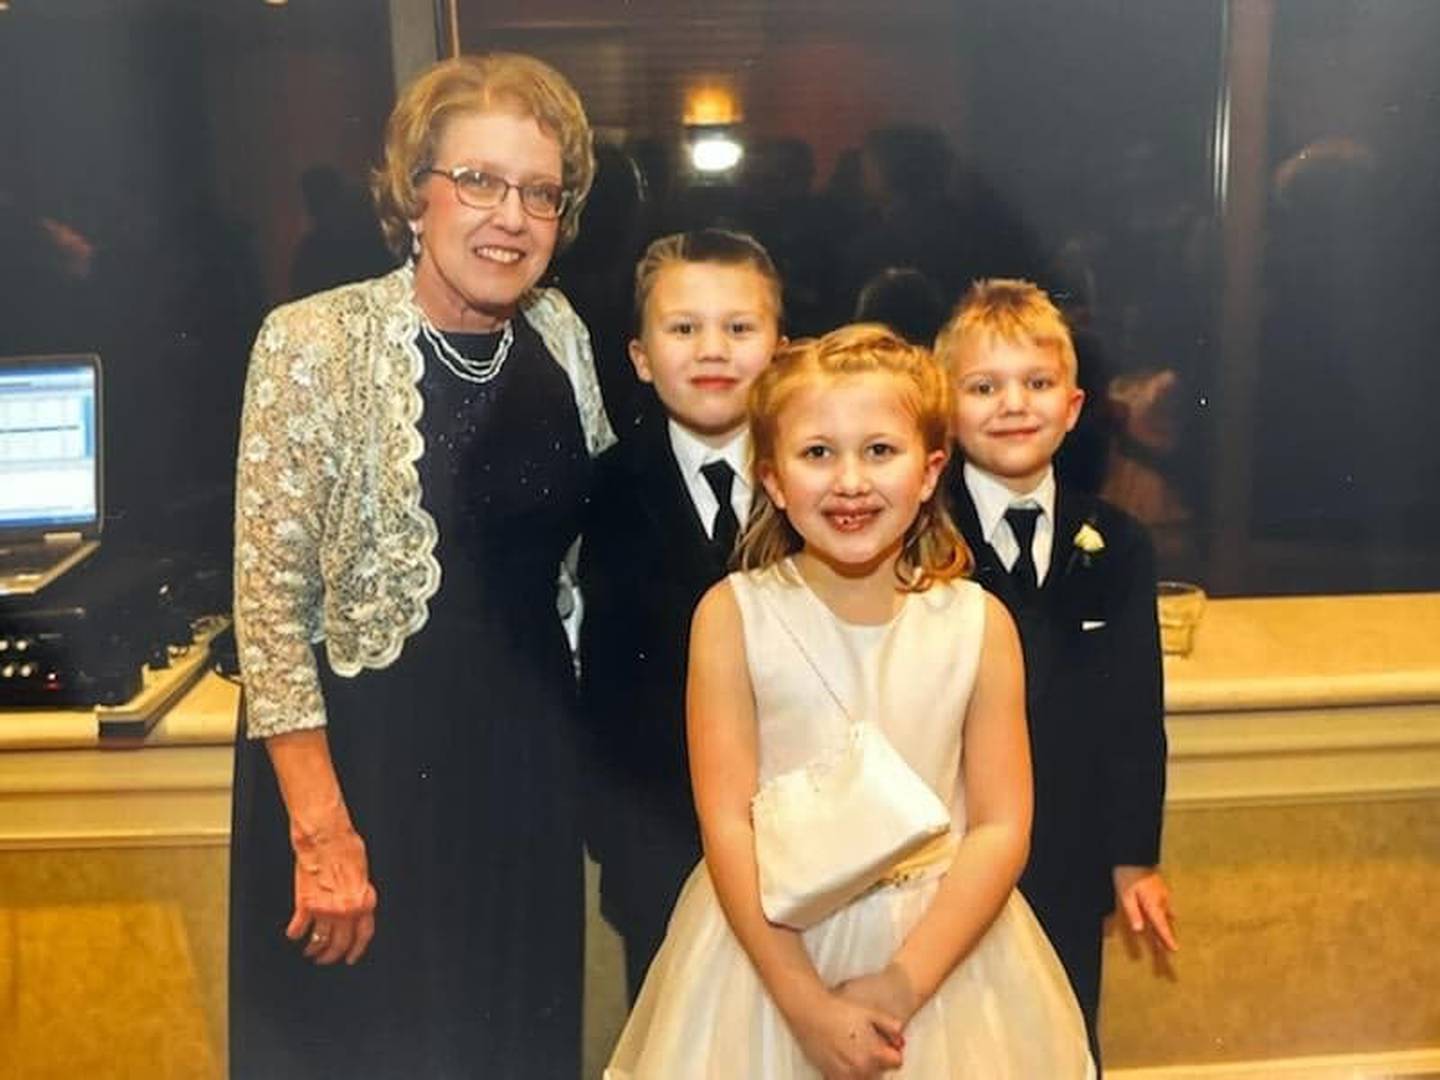 Betty Morman, formerly of Channahon, is pictured with her grandchildren Kurt, Ben and Avery. Betty saw nursing more as a vocation than a career and had a nurse's heart from her earliest days.